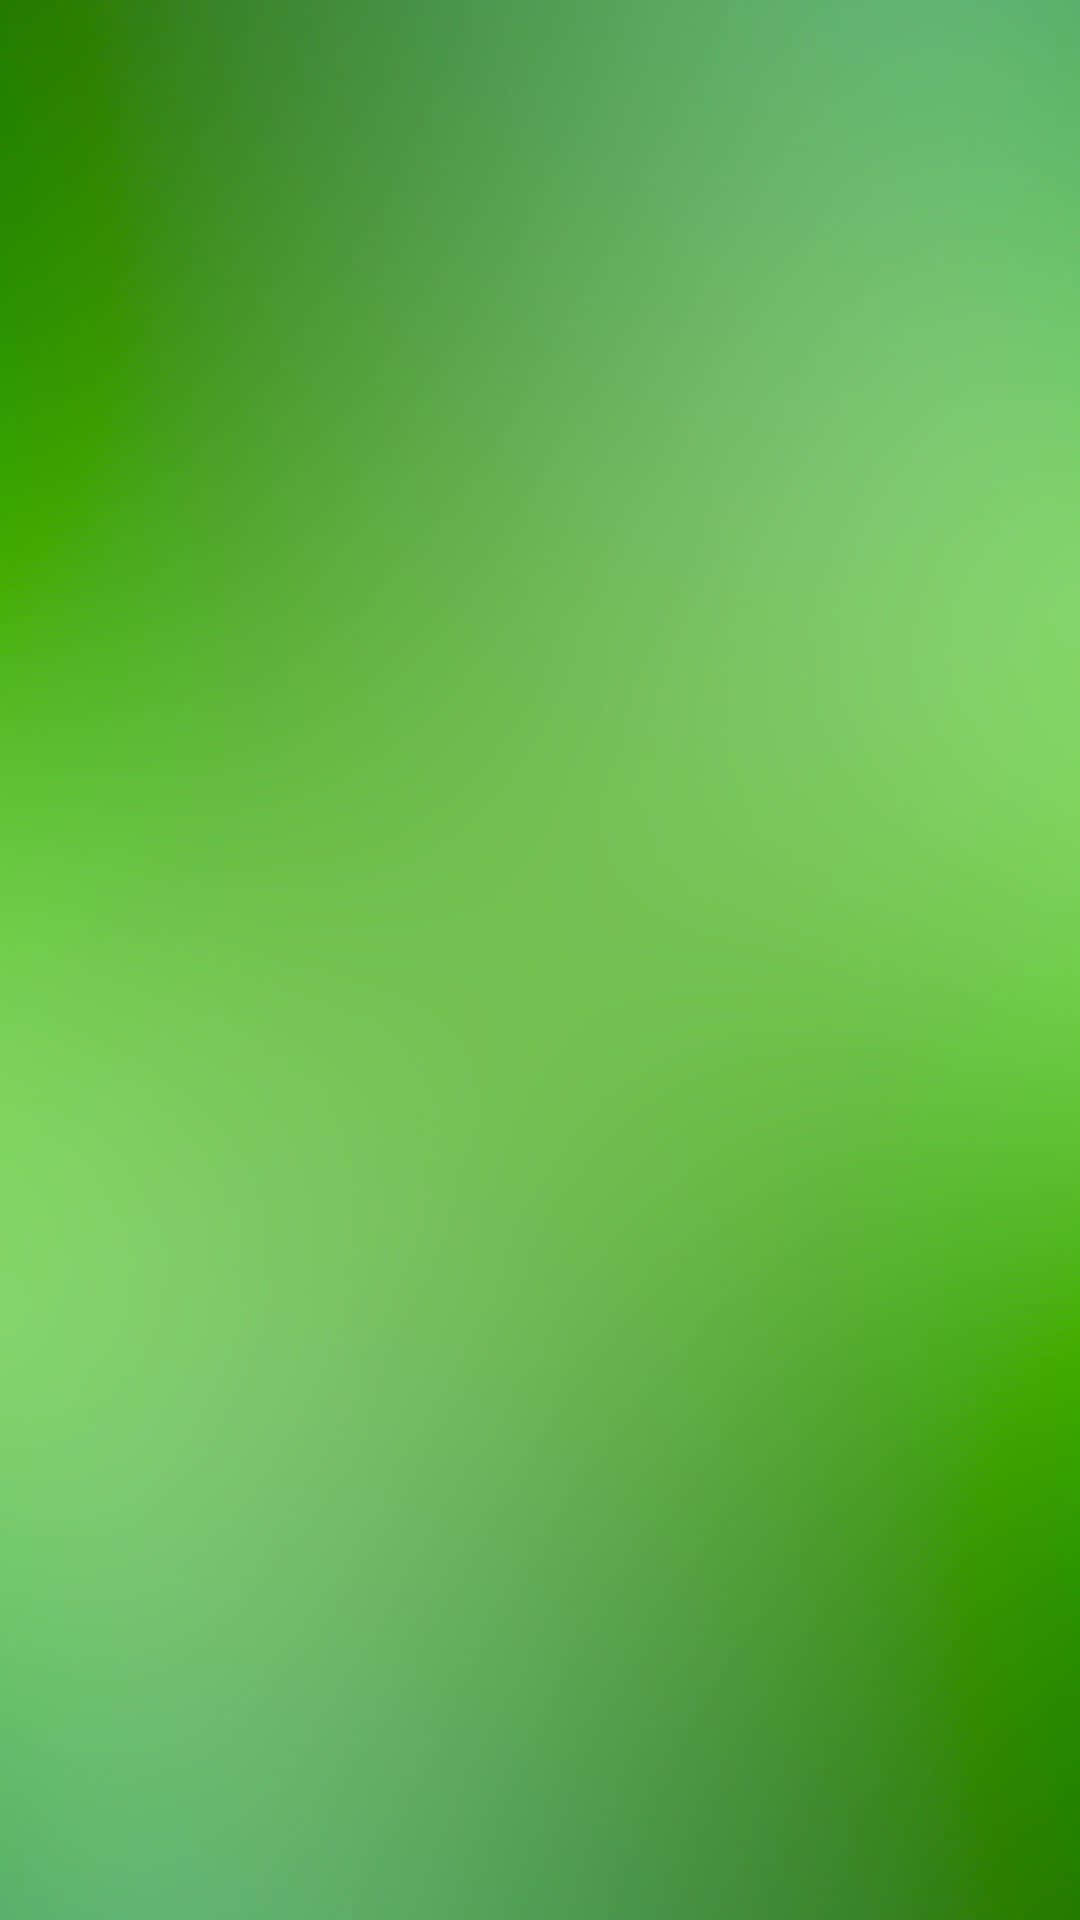 Showcase Your Brand with a Vibrant Green Gradient